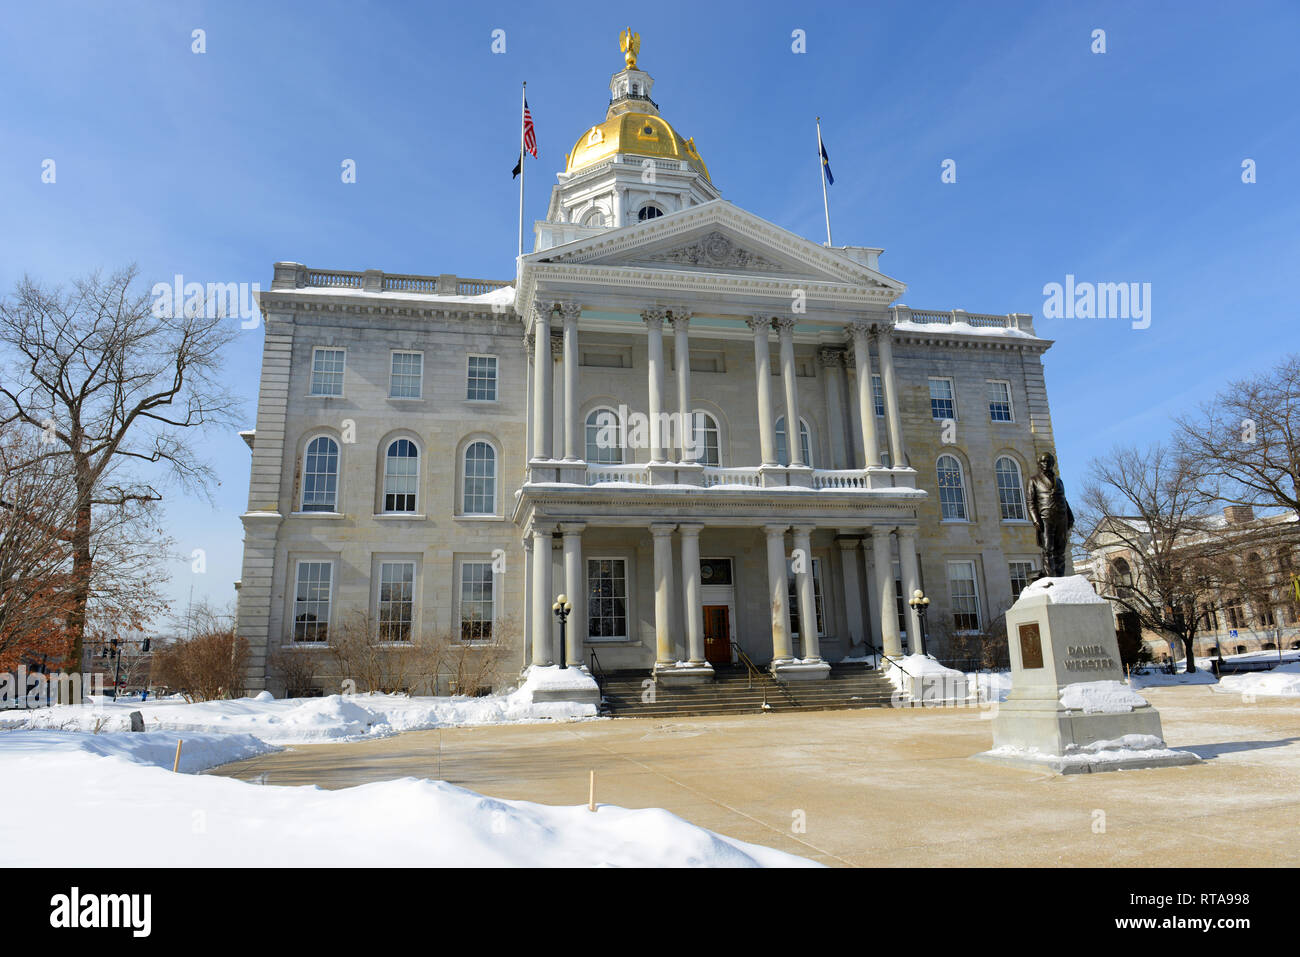 New Hampshire State House in Winter, Concord, New Hampshire, USA. New Hampshire State House ist das älteste State House, 1816 - 1819. Stockfoto